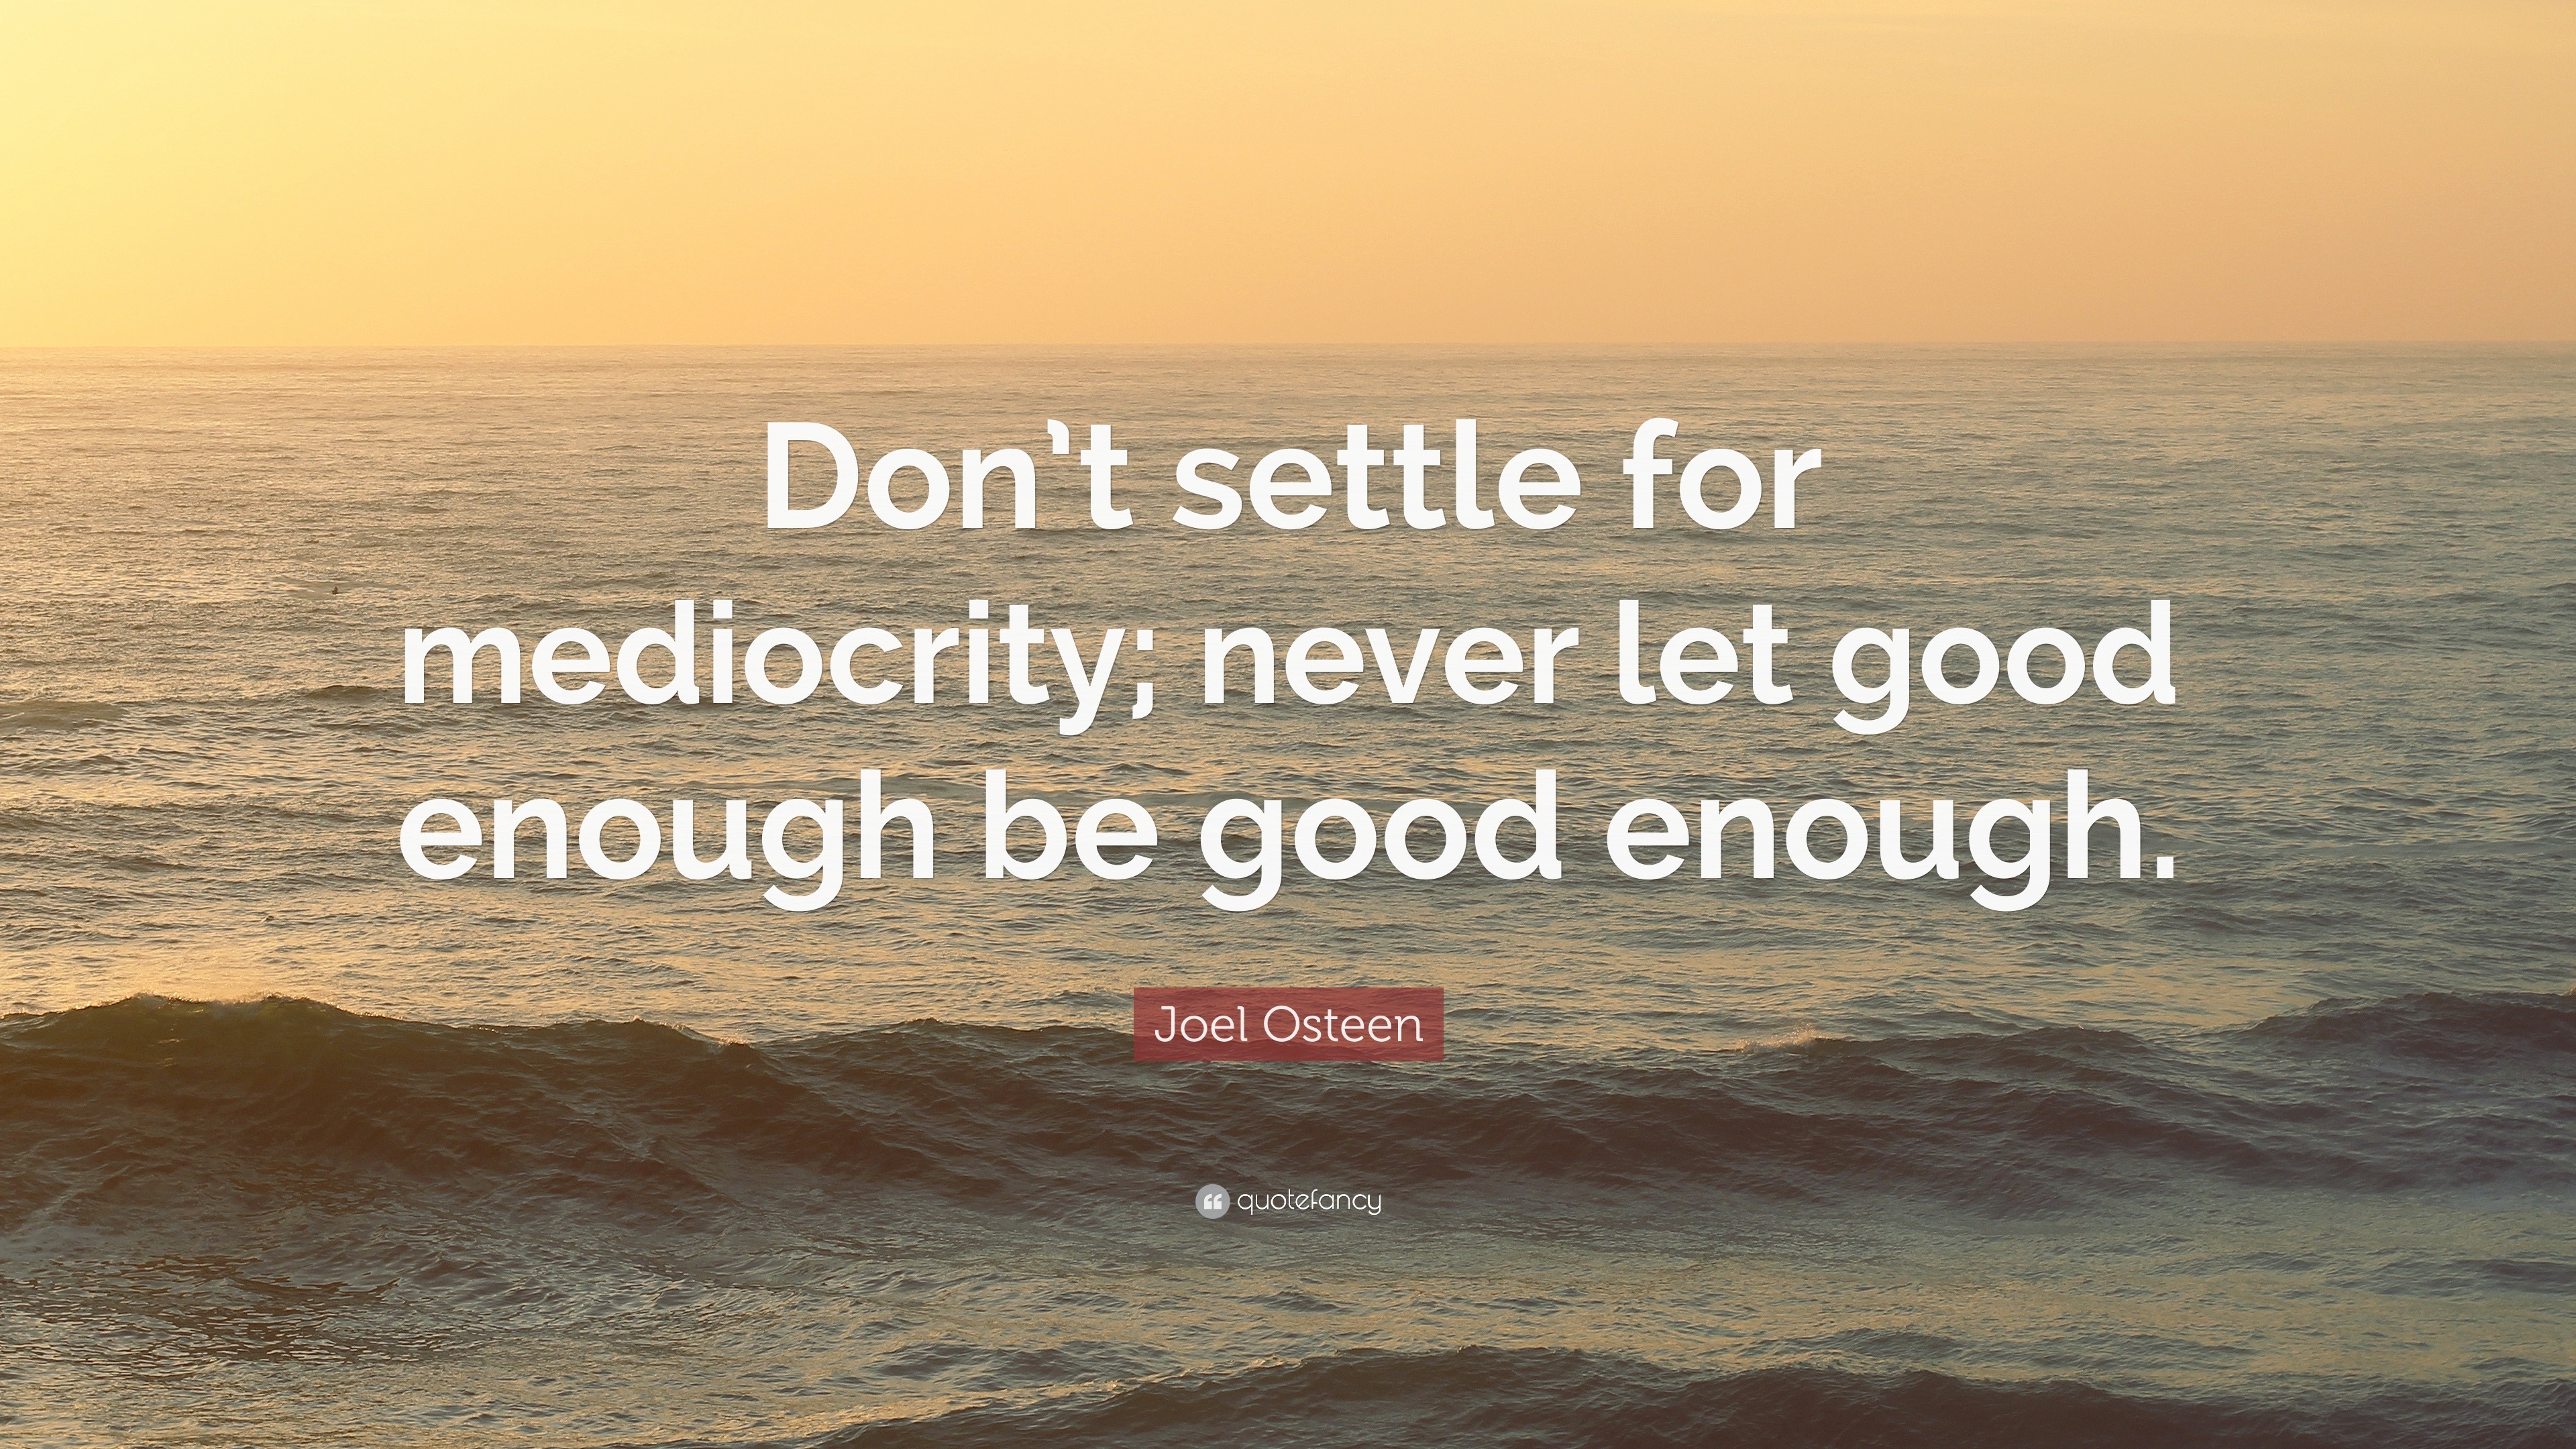 Joel Osteen Quote “Don’t settle for mediocrity; never let good enough